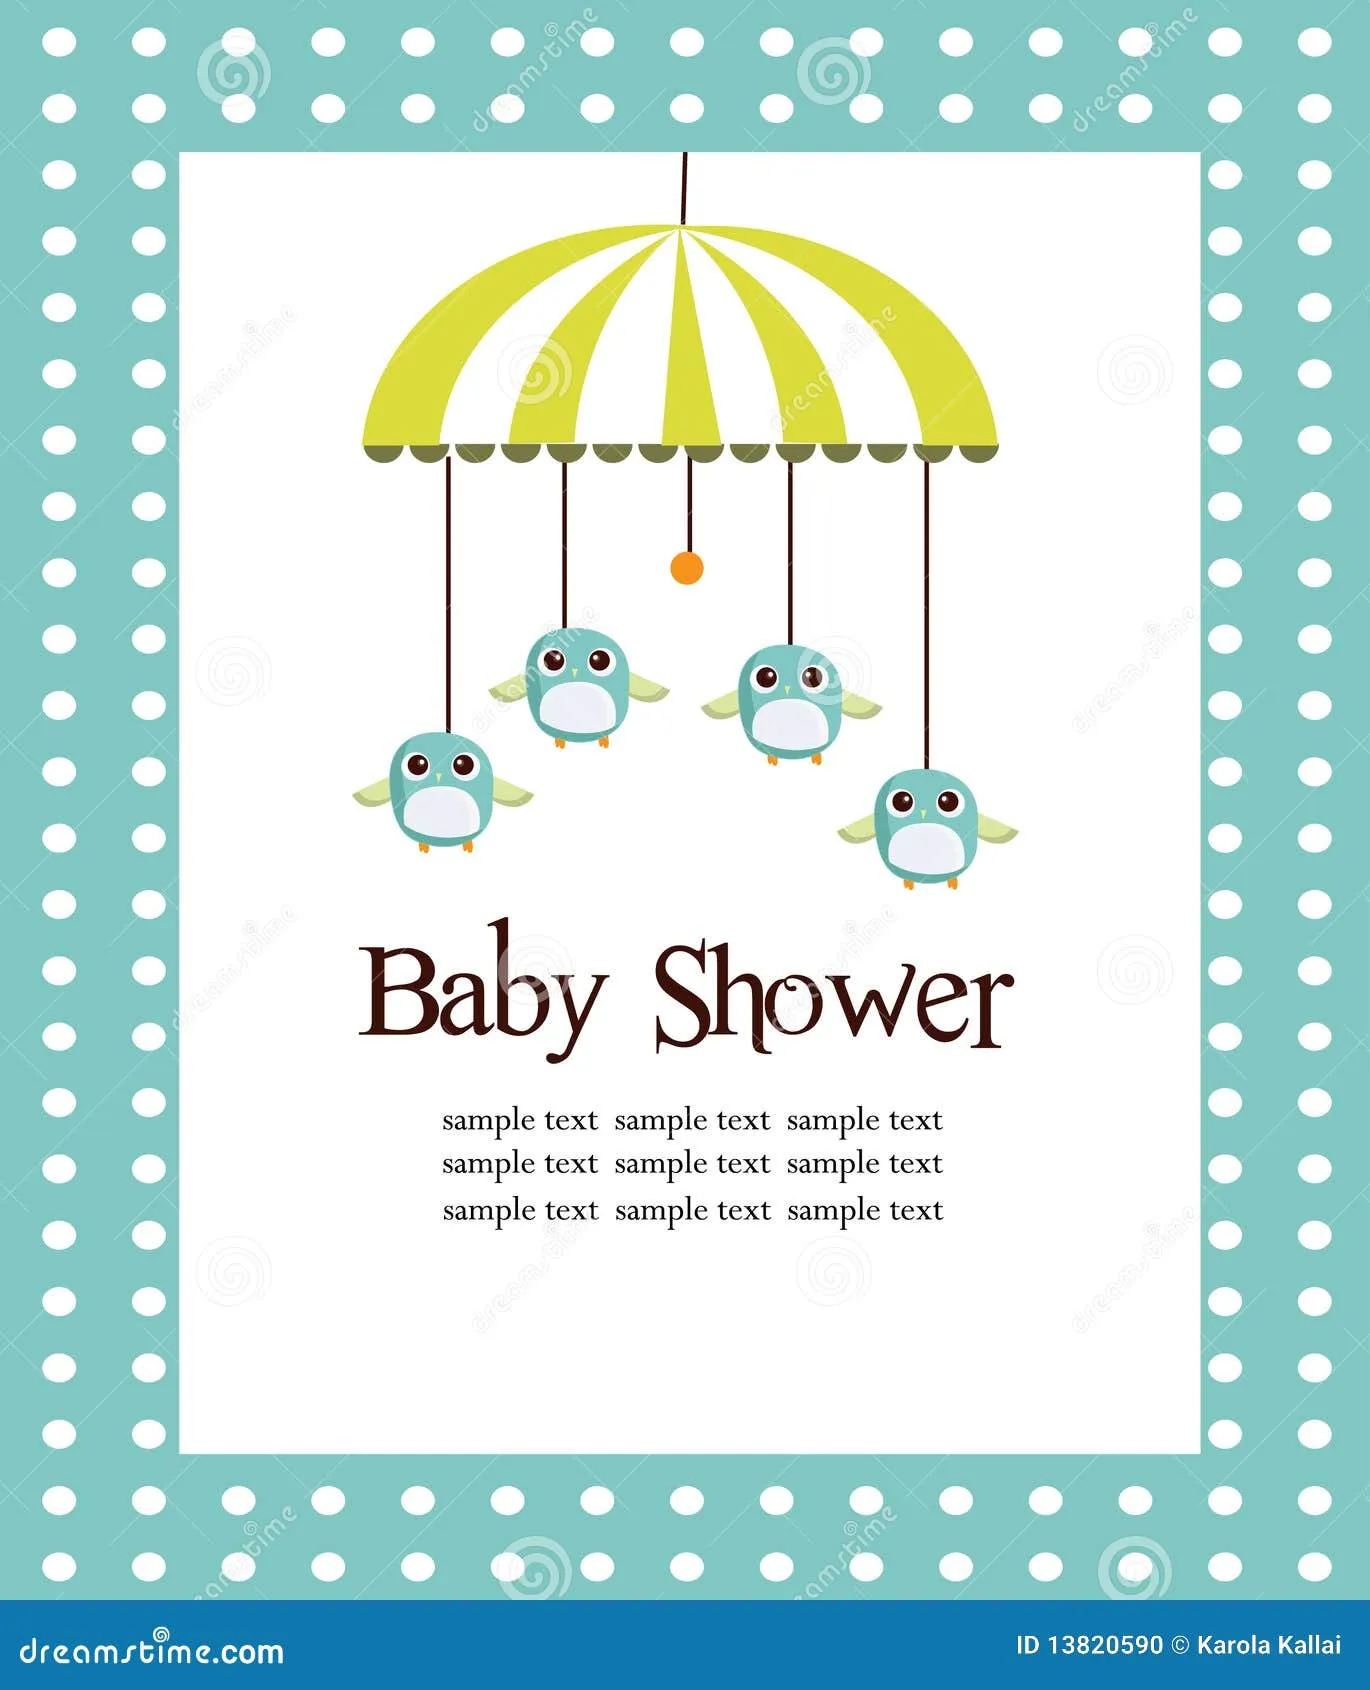 Baby Shower Card For Boys Stock Photo - Image: 13820590